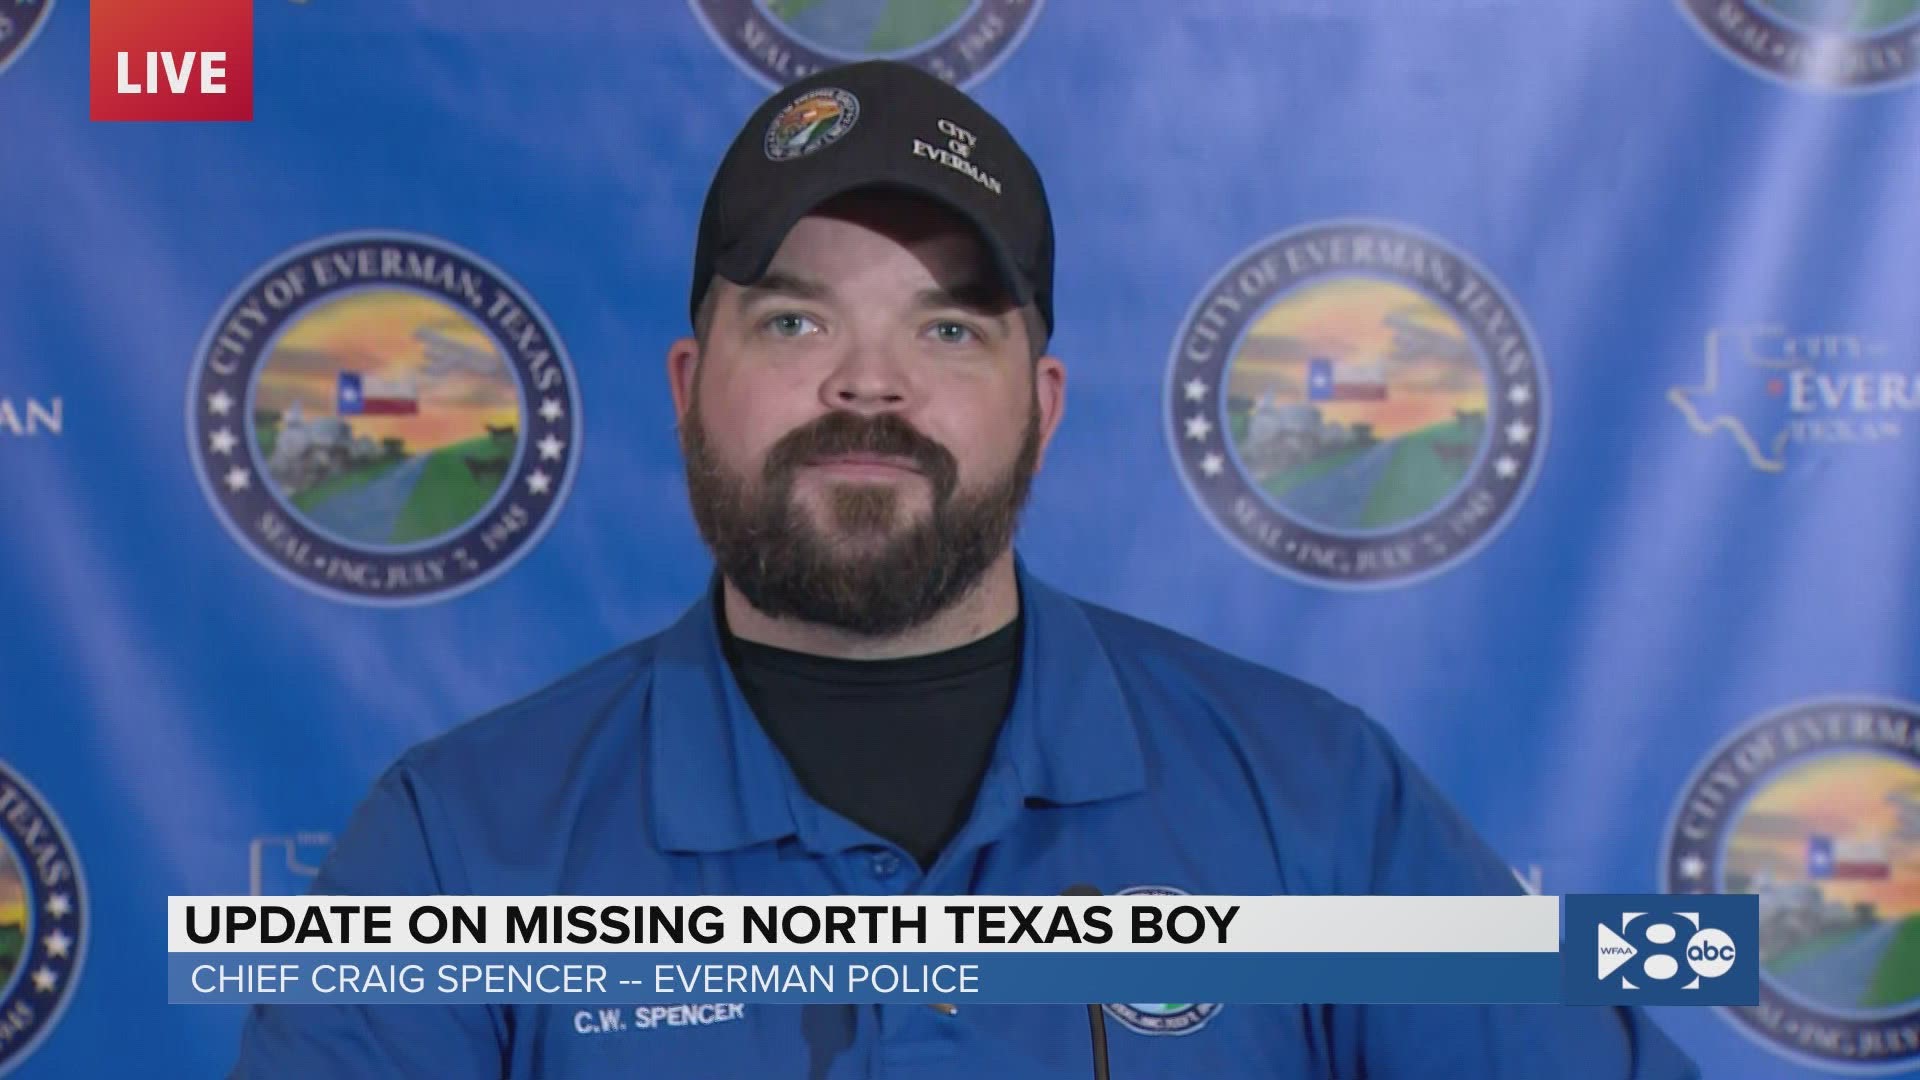 The family of a missing North Texas boy has left the country, according to police. The Everman police chief has a message for the mother who has been uncooperative.